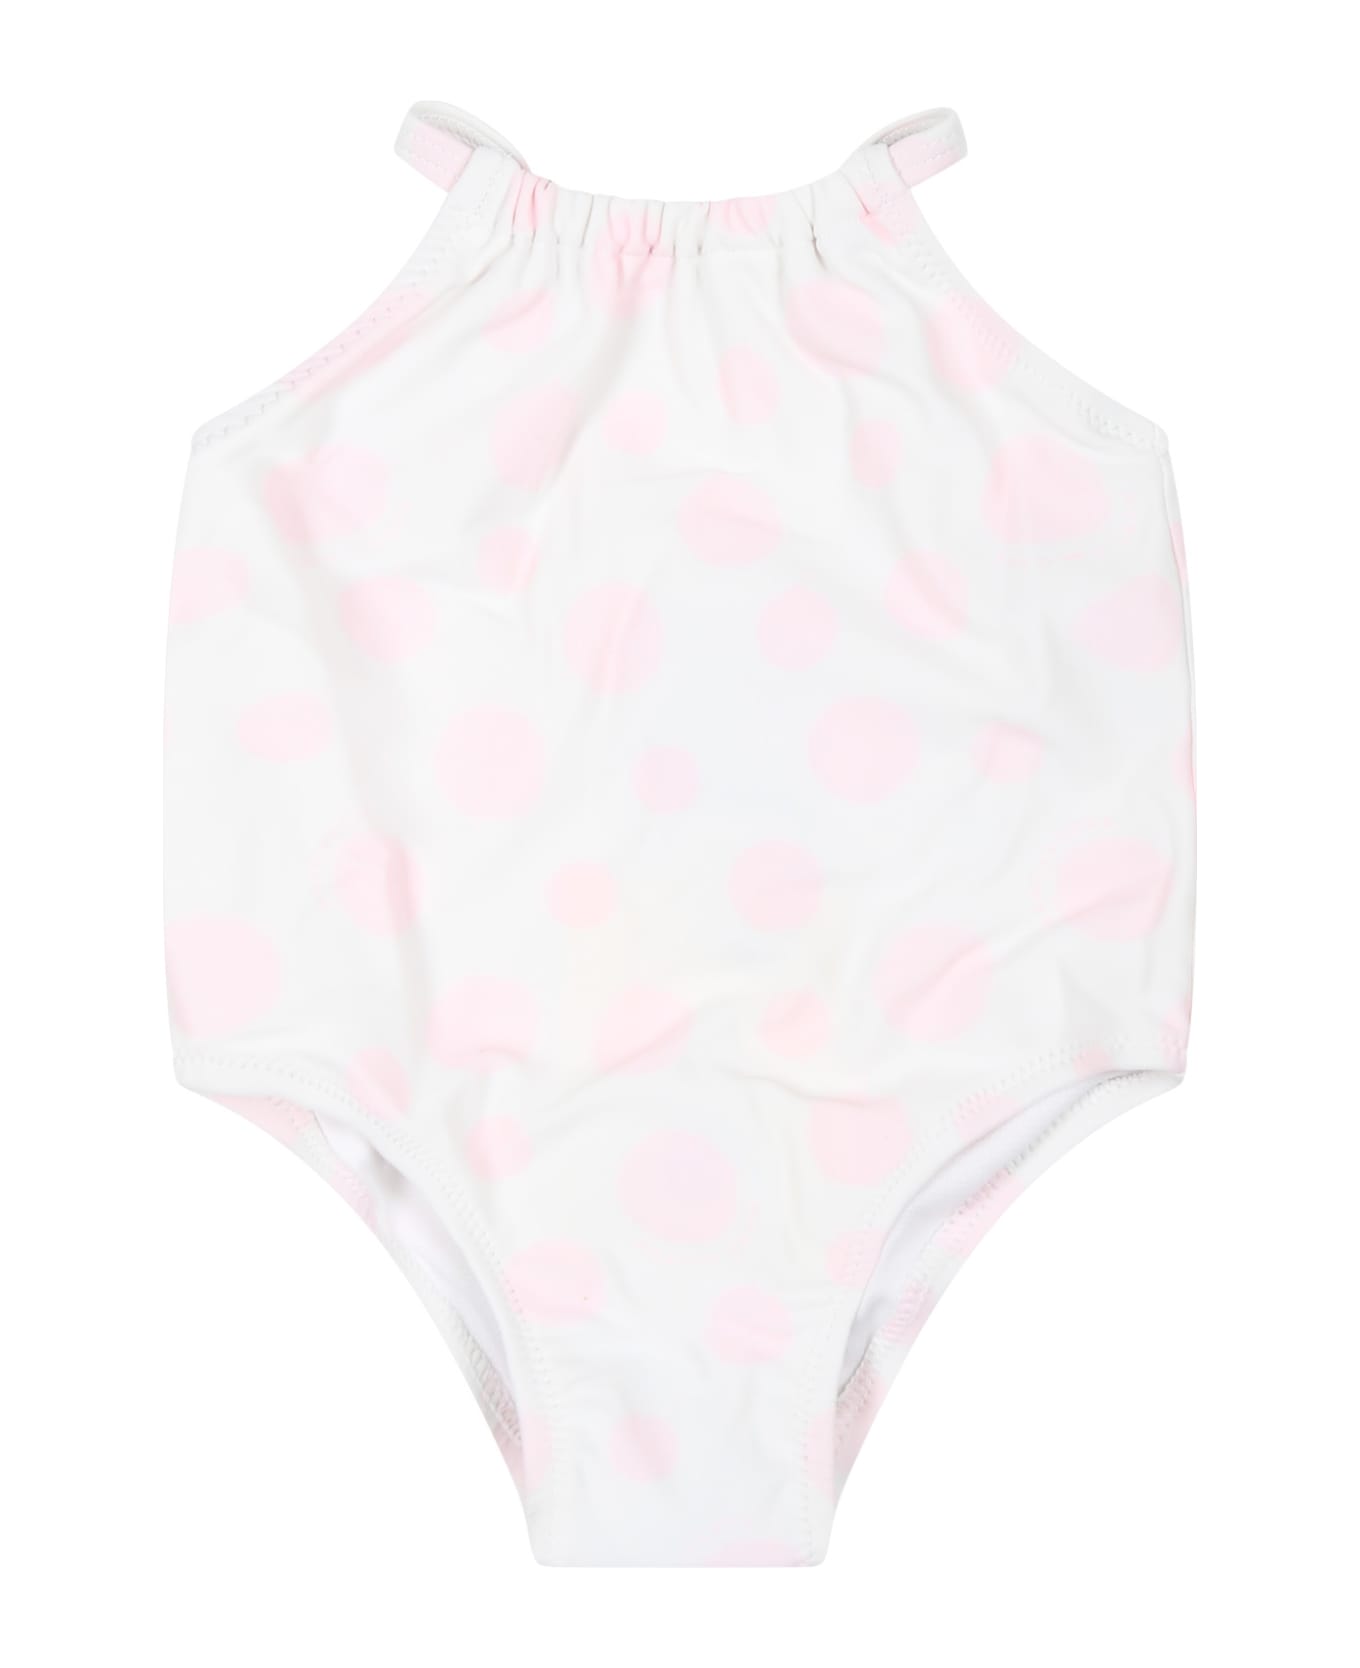 Marc Jacobs White One-piece Swimsuit For Baby Girl With Polka Dot Pattern - White 水着